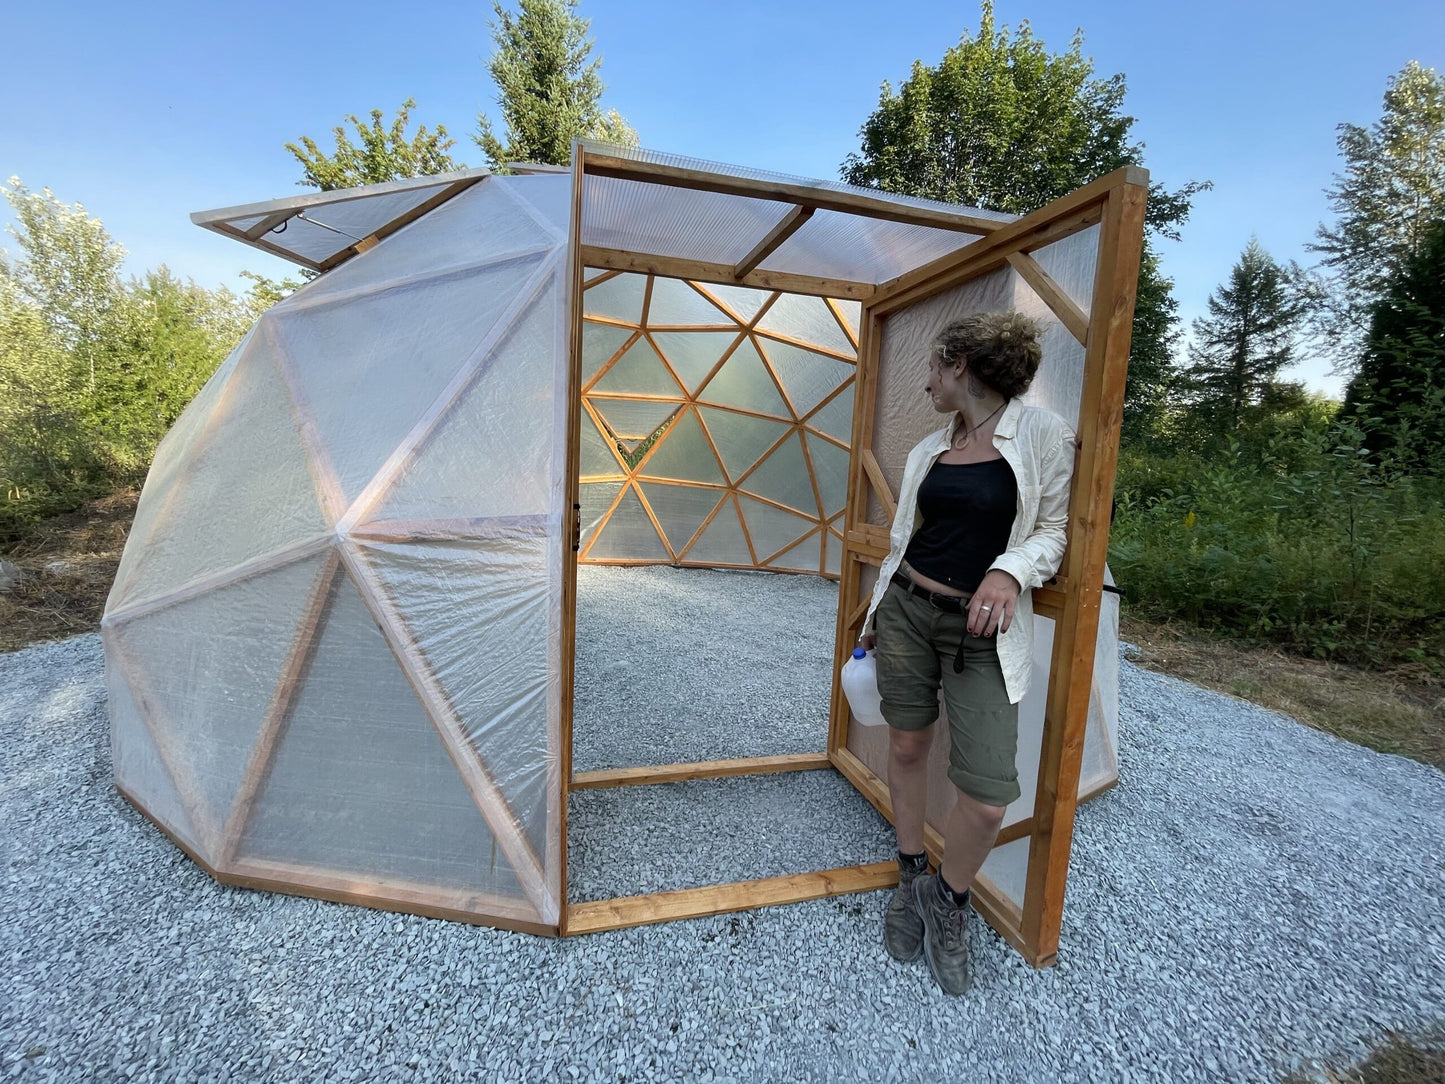 The Eden Loom Greenhouse Dome